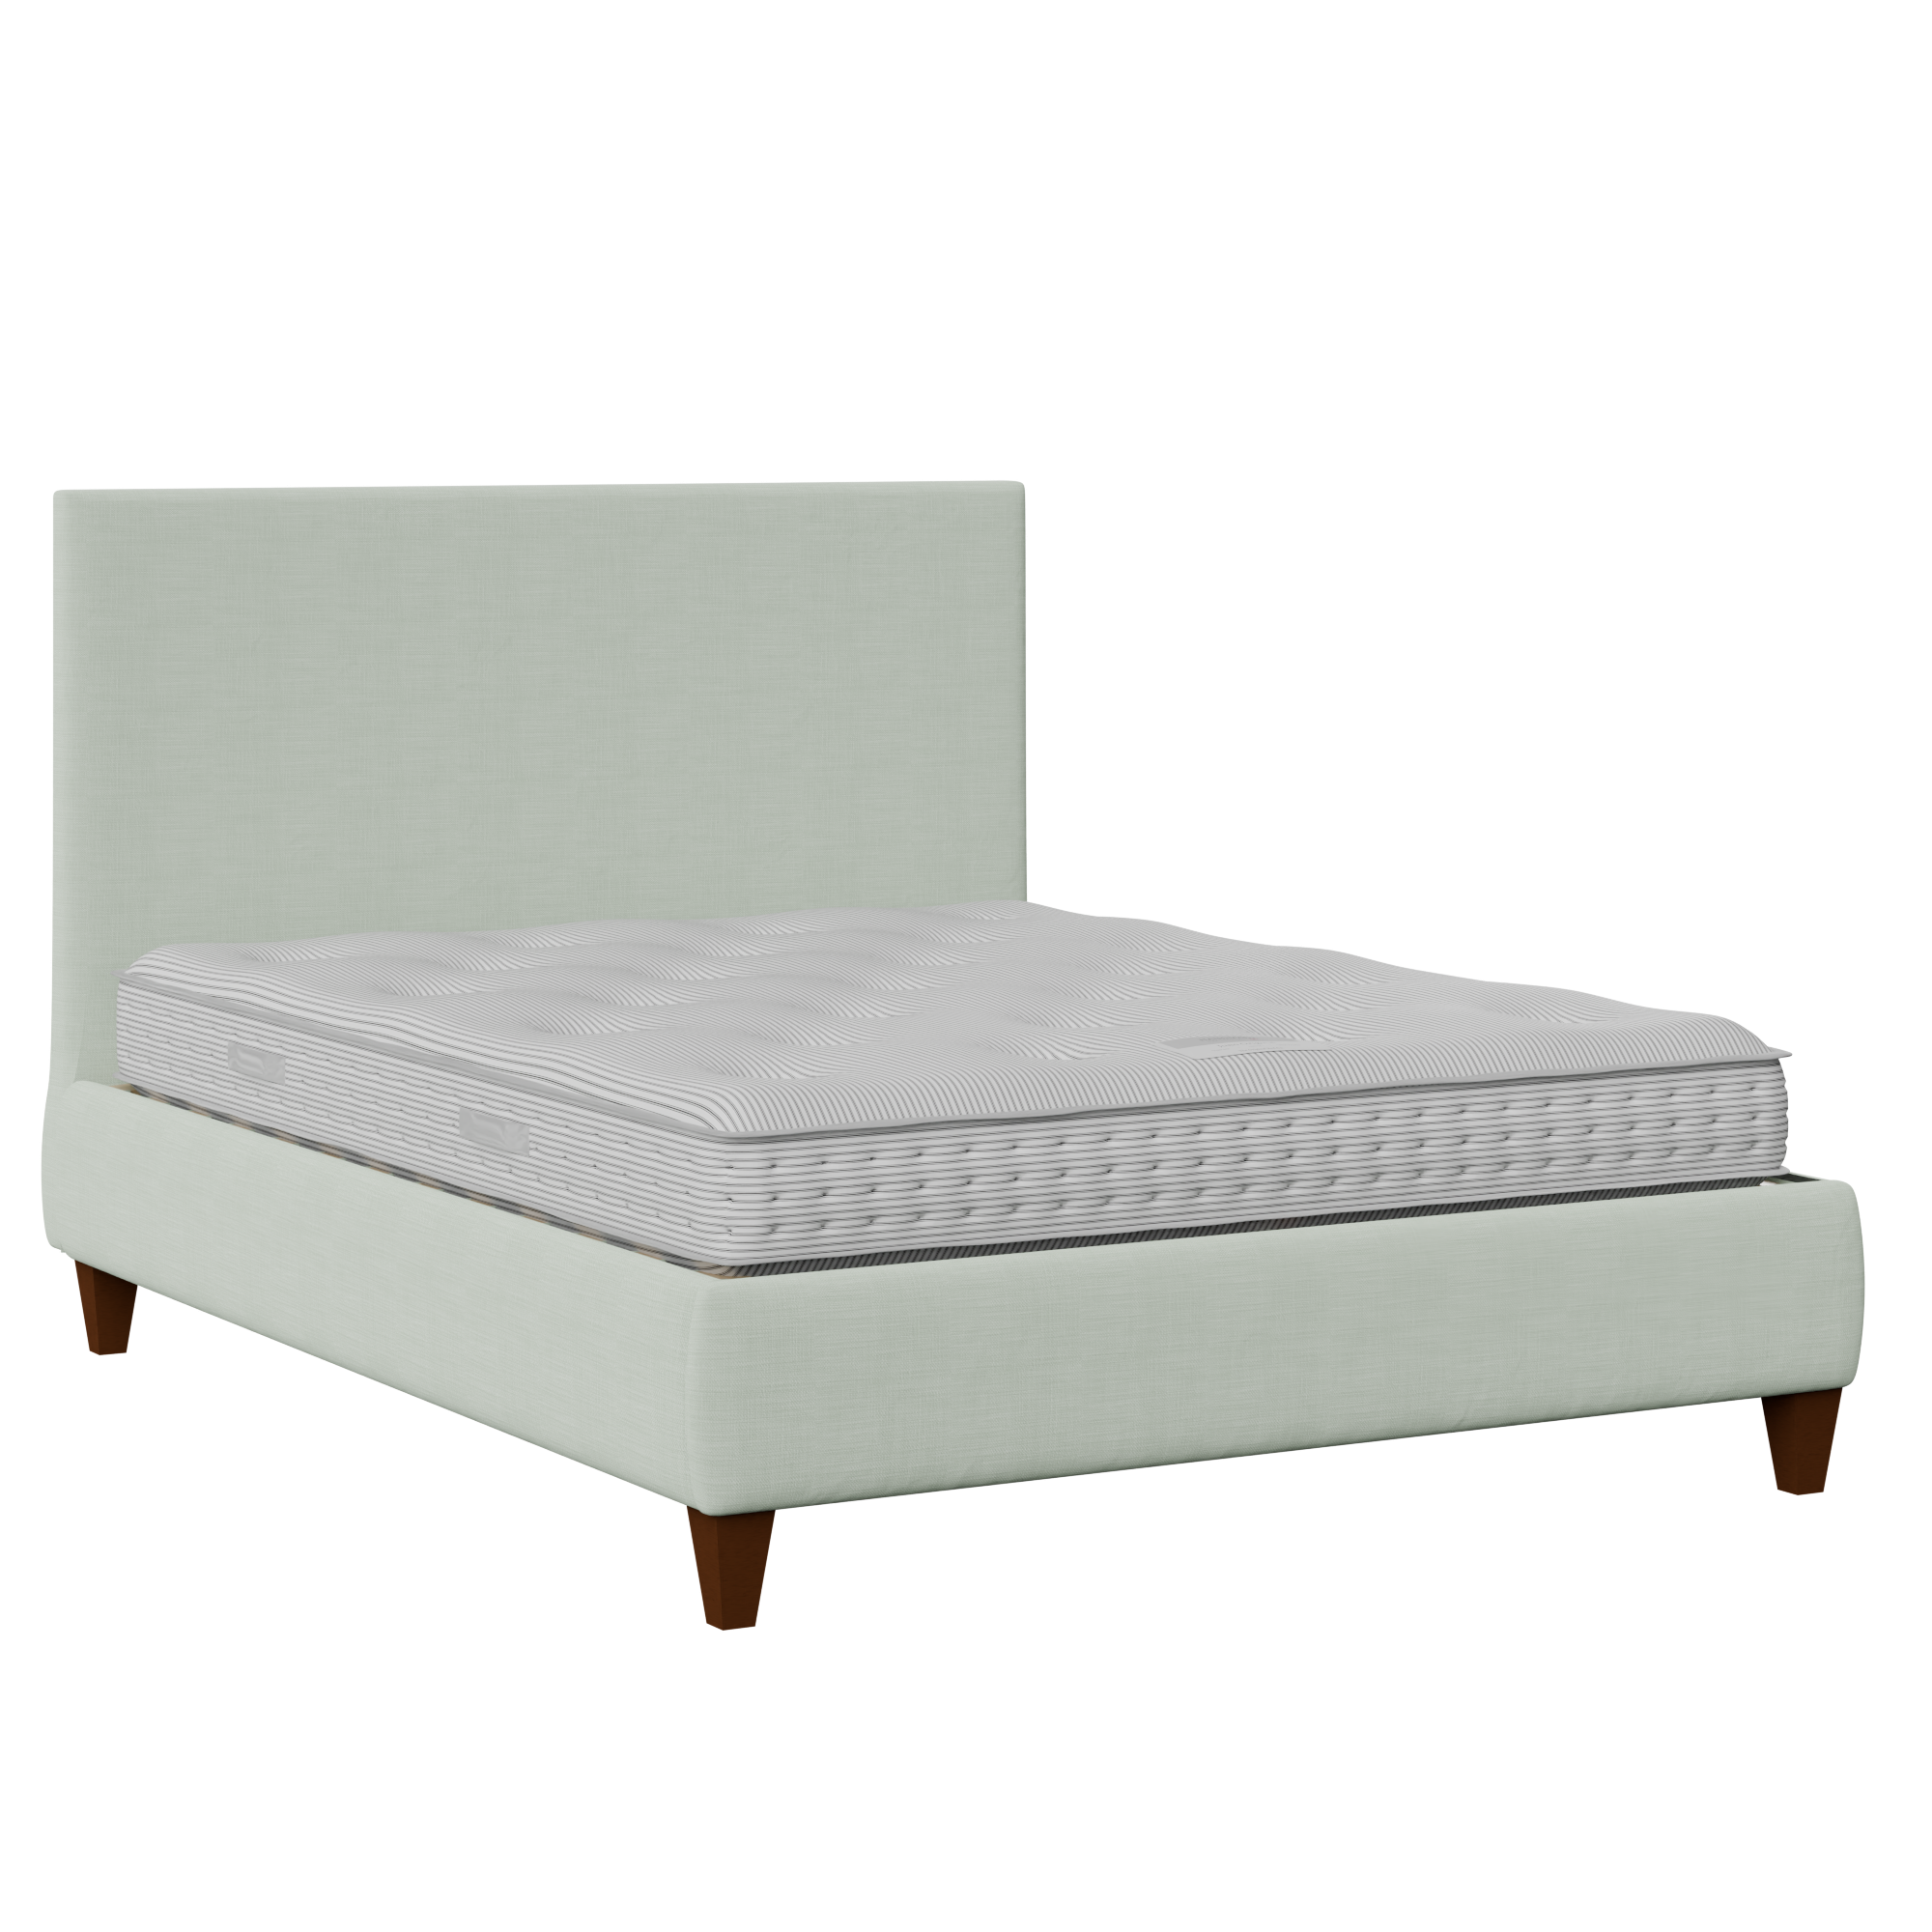 Yushan upholstered bed in duckegg fabric